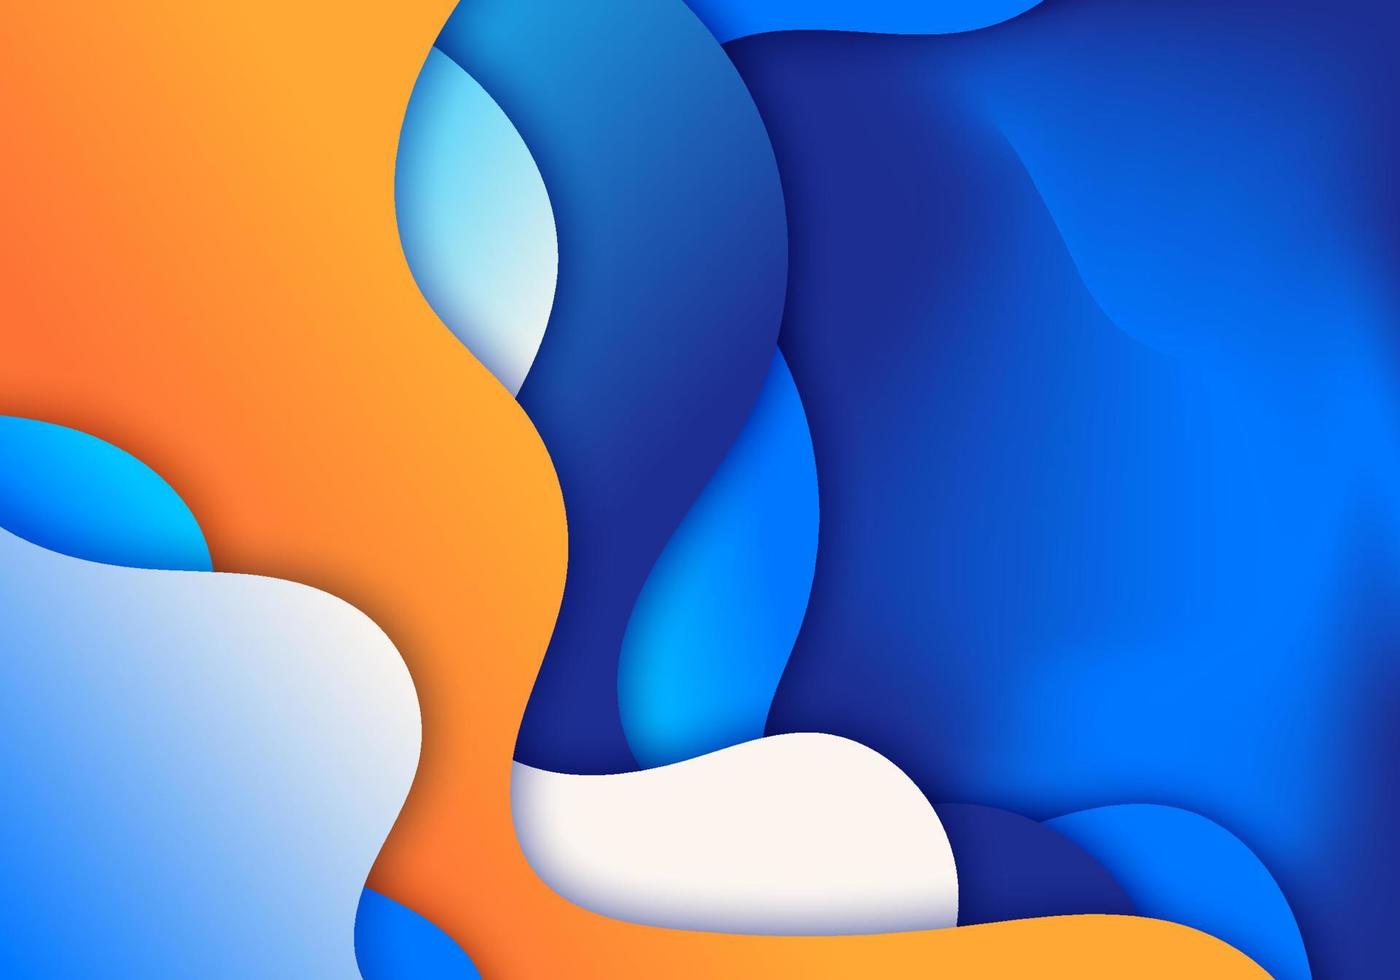 Abstract 3D blue wave or liquid gradient shapes background paper art style vector